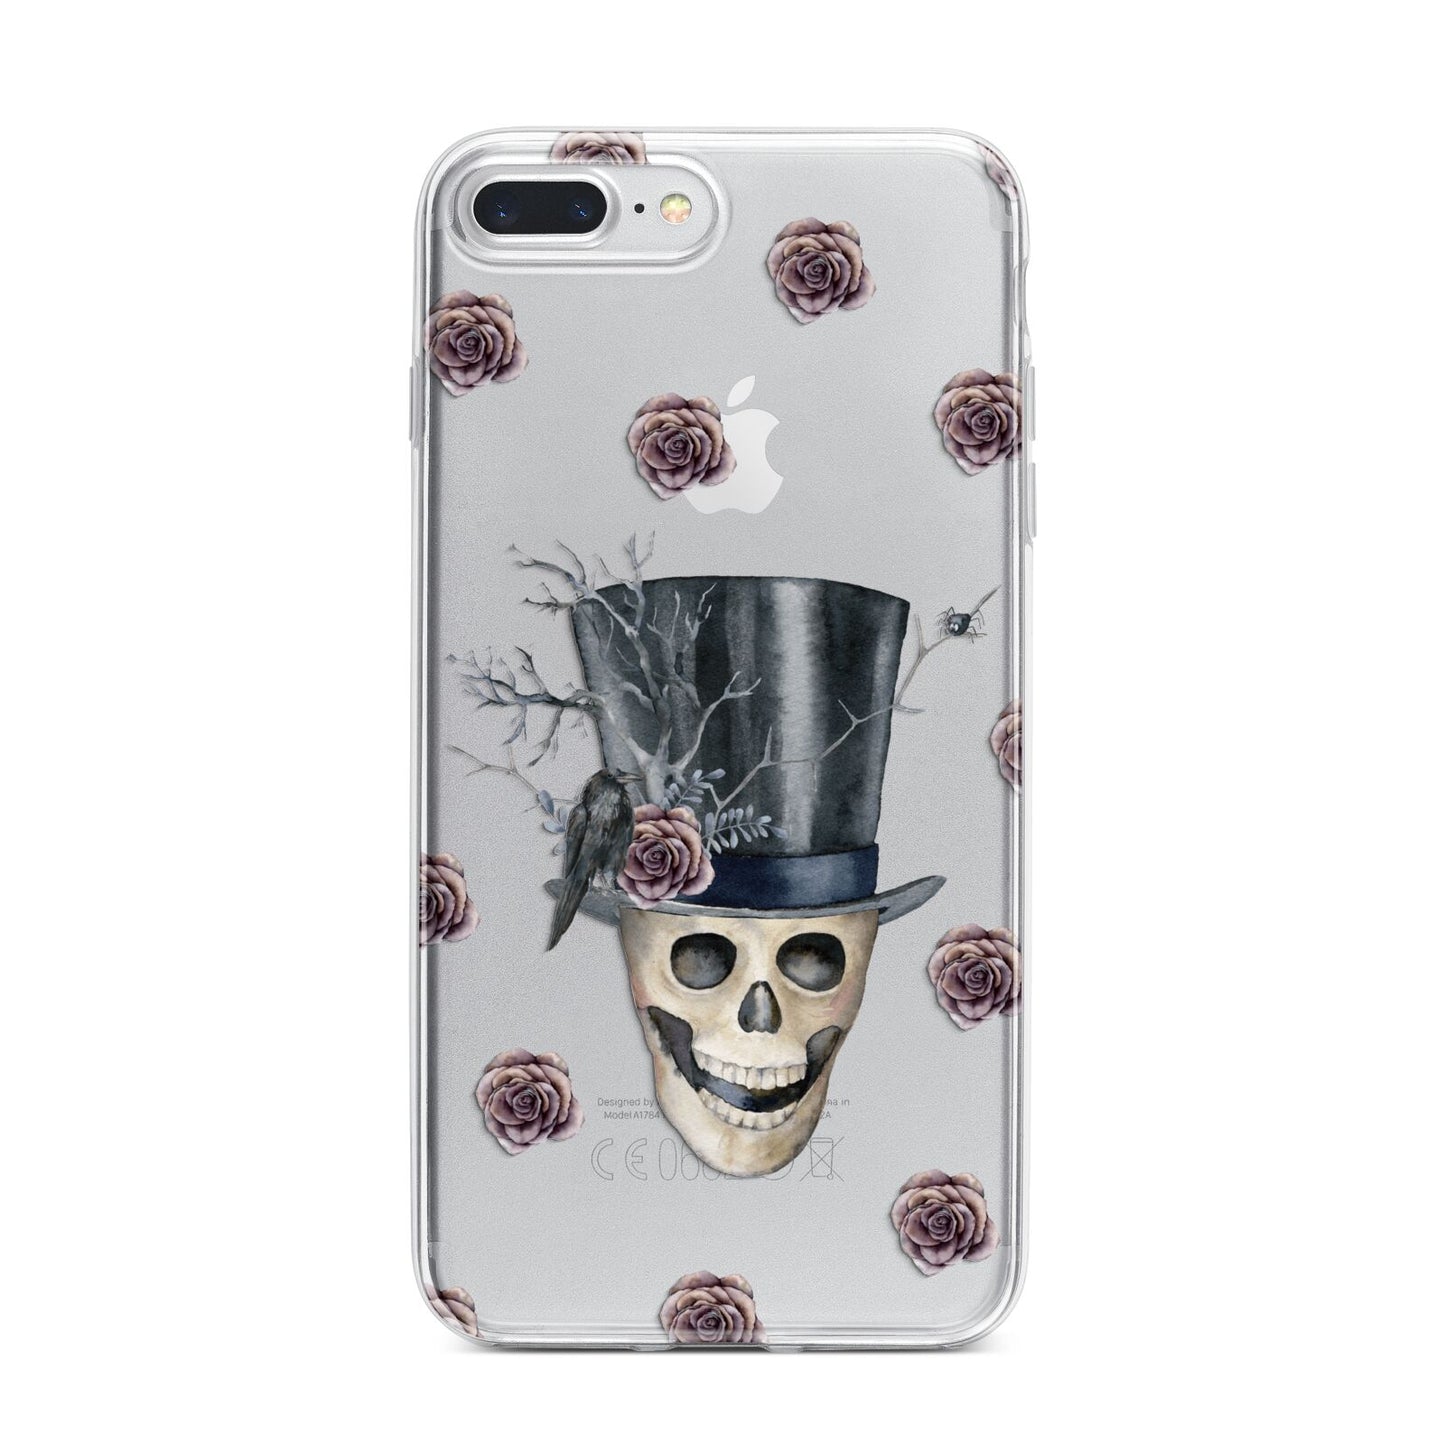 Top Hat Skull iPhone 7 Plus Bumper Case on Silver iPhone